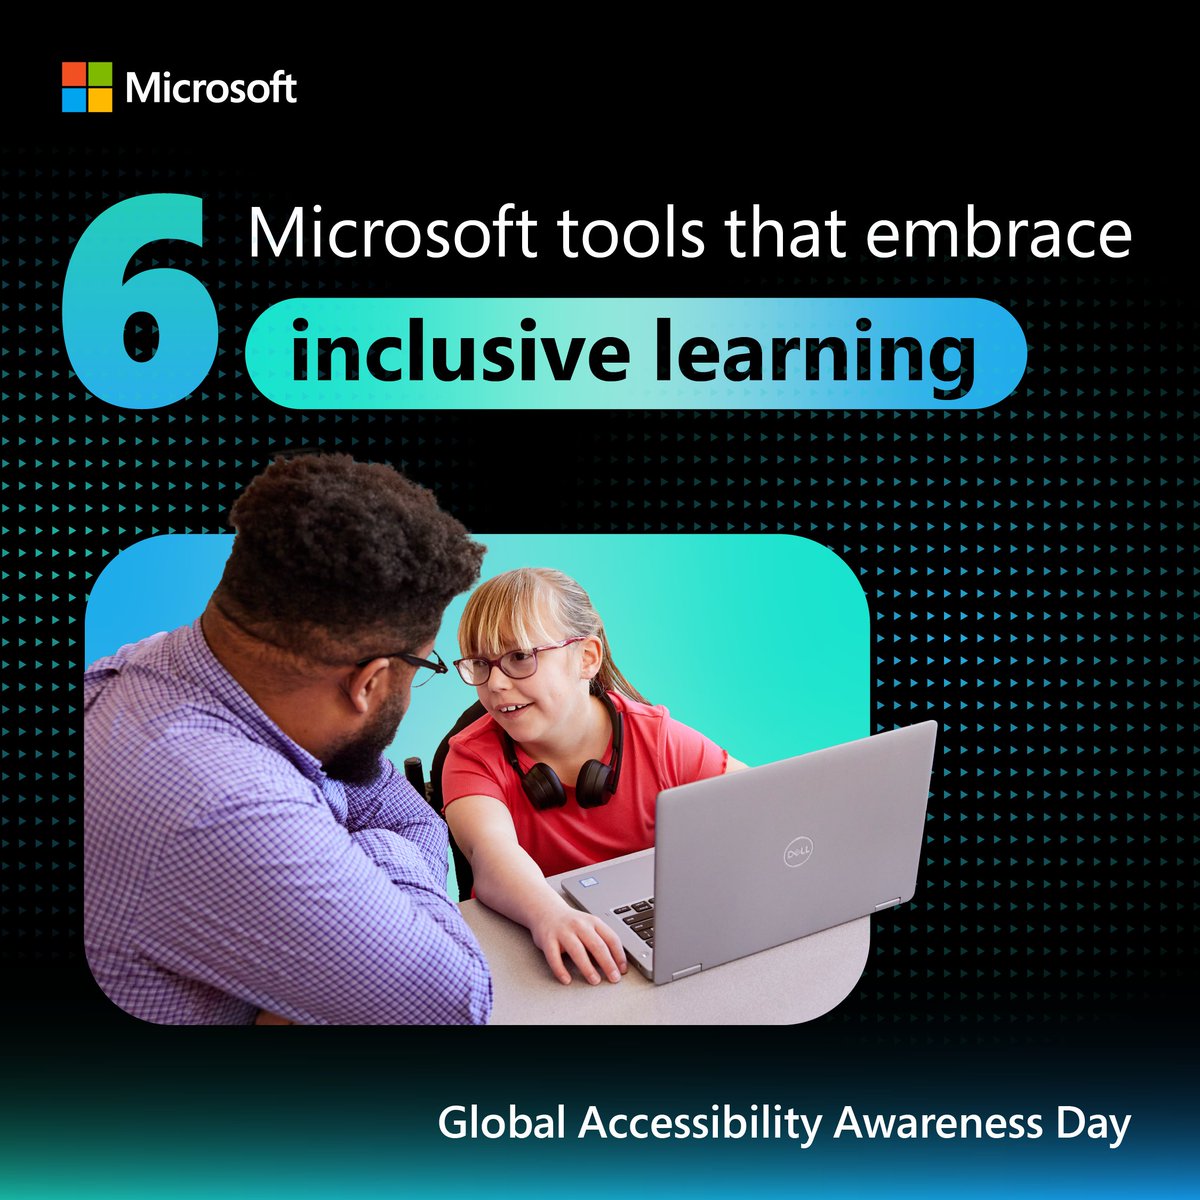 84% of educators say it's impossible to achieve educational equity without accessible learning tools. This #GAAD, discover tools from #MicrosoftEDU that put inclusion at the forefront of every learning experience: msft.it/6017YkZIh